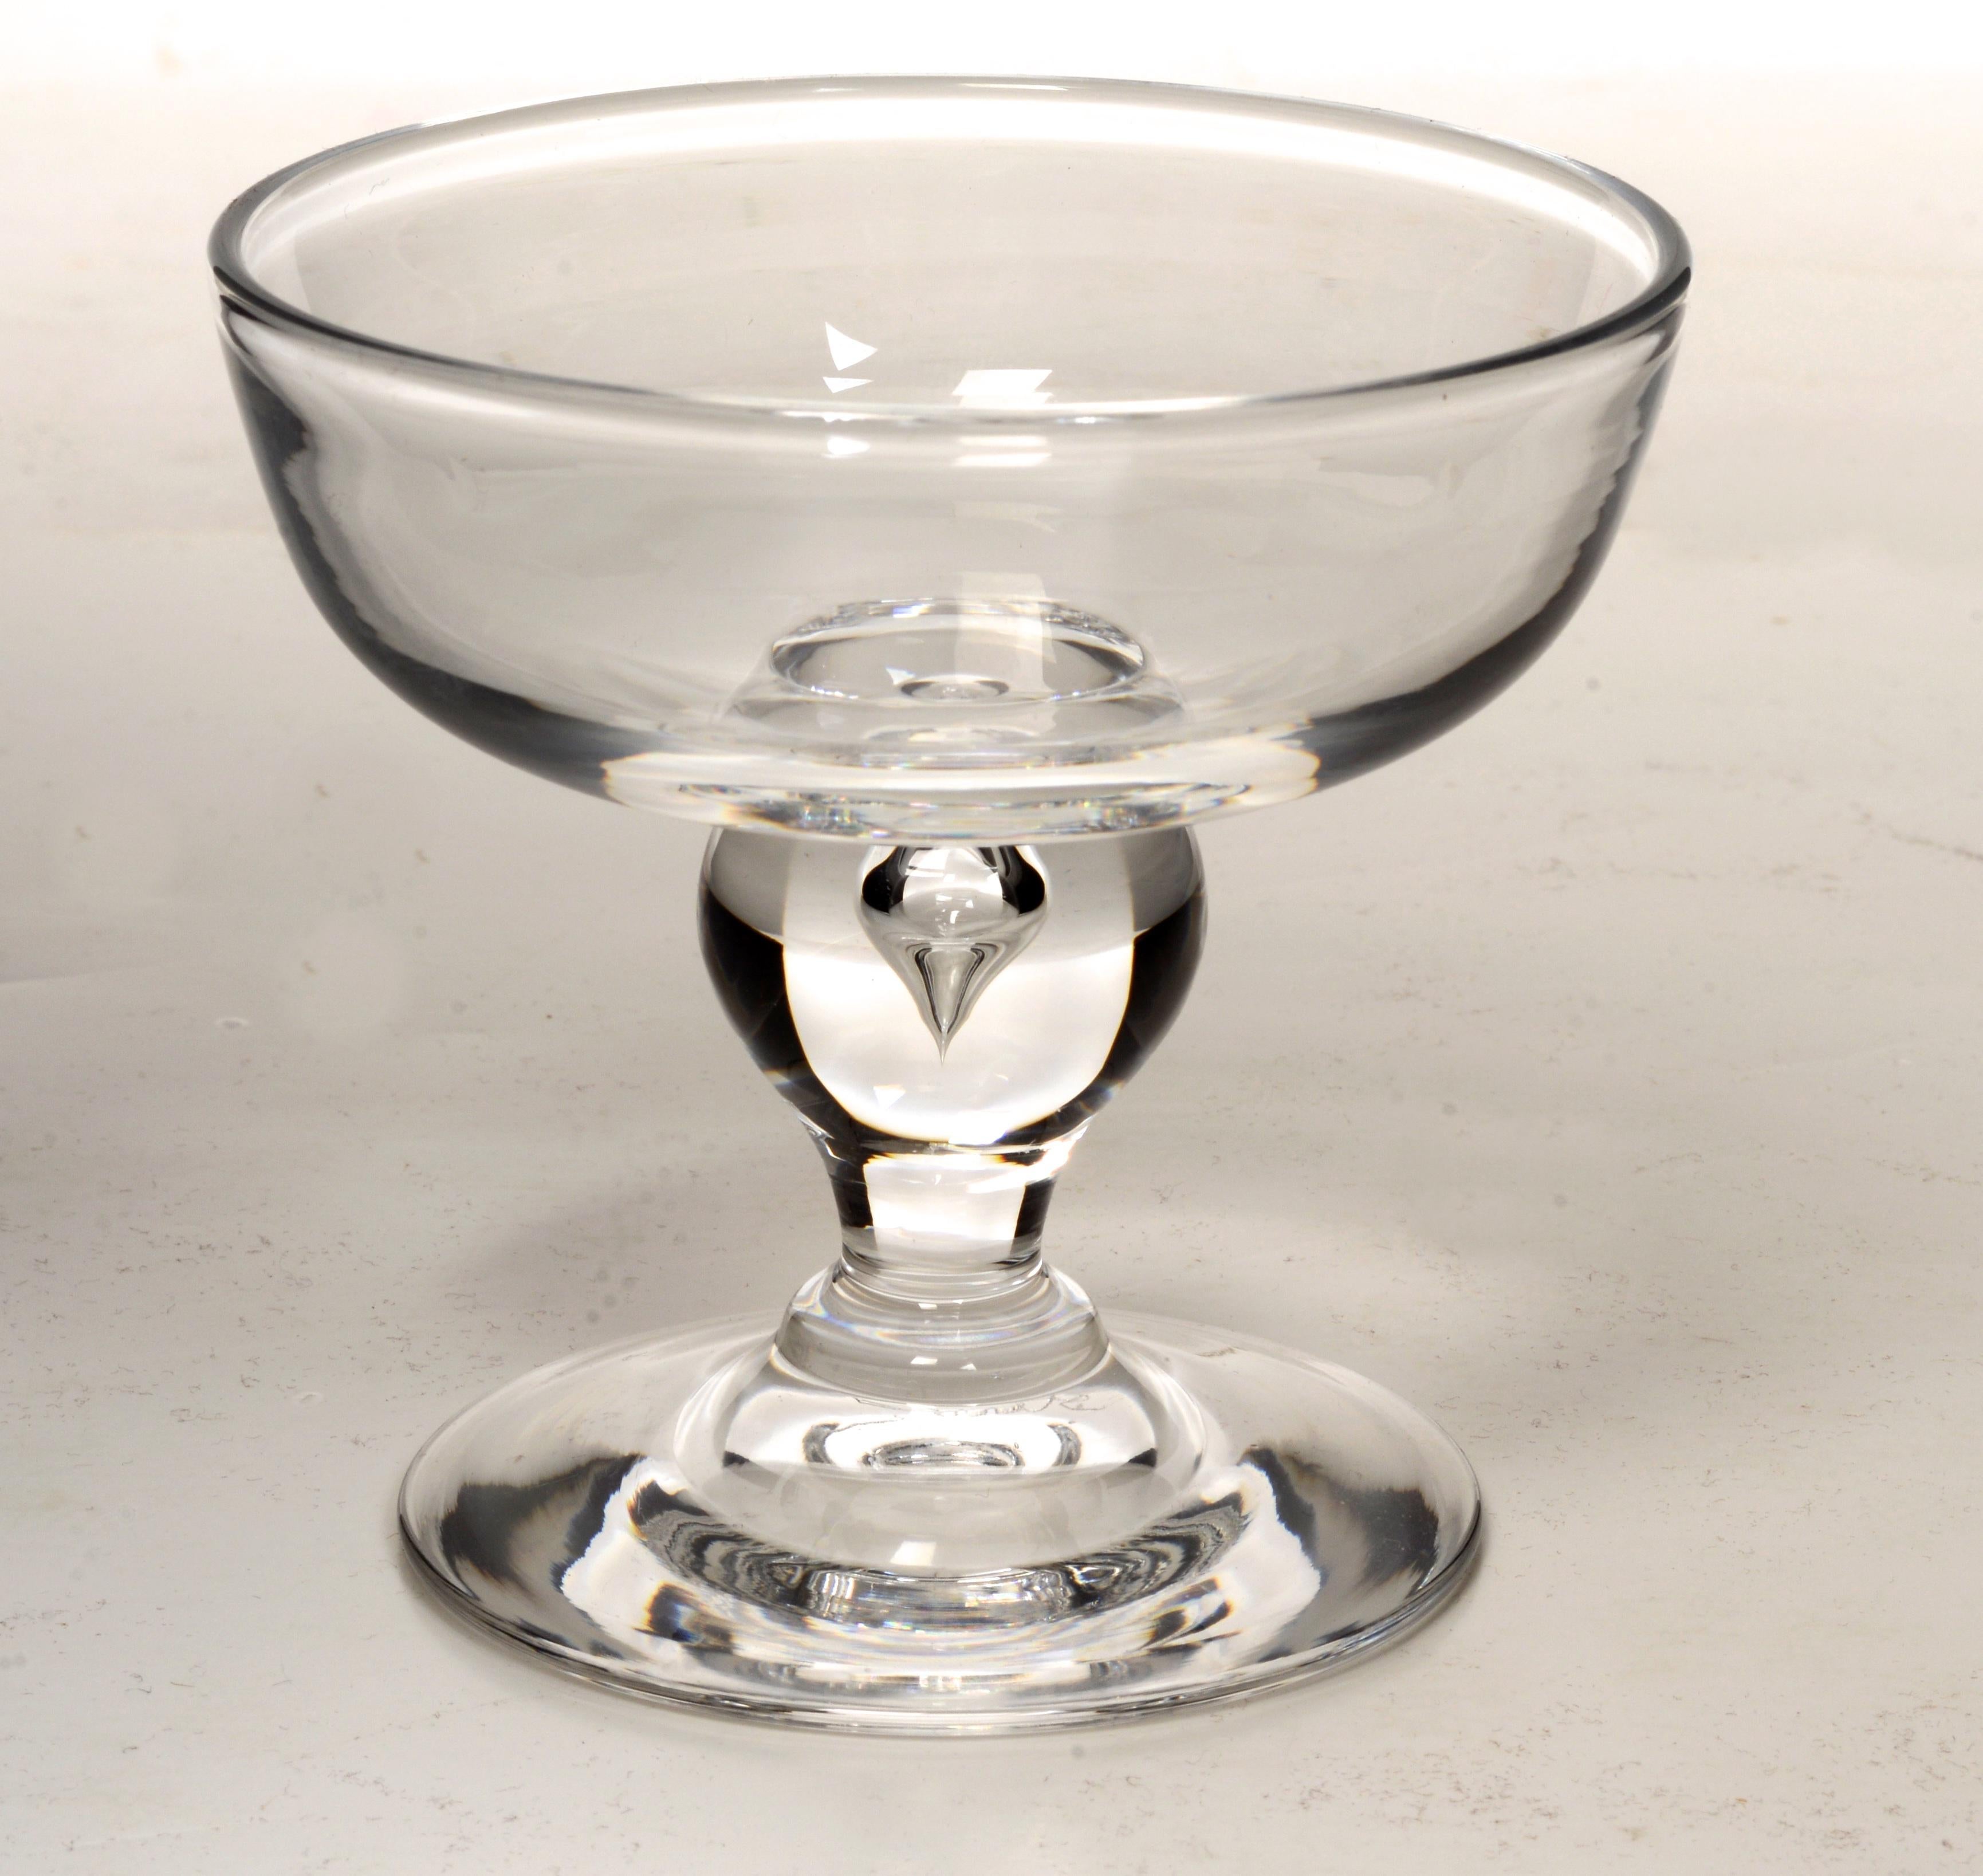 A Set of 16 George Thompson Designed Hand Blown Steuben Champagne/Coupe/Tall Sherbet Pattern #7877, Mid 20th c Glasses. Steuben glass is elegantly contemporary and flawlessly executed. Steuben is an offshoot of Corning Glass Works in Corning, N.Y.